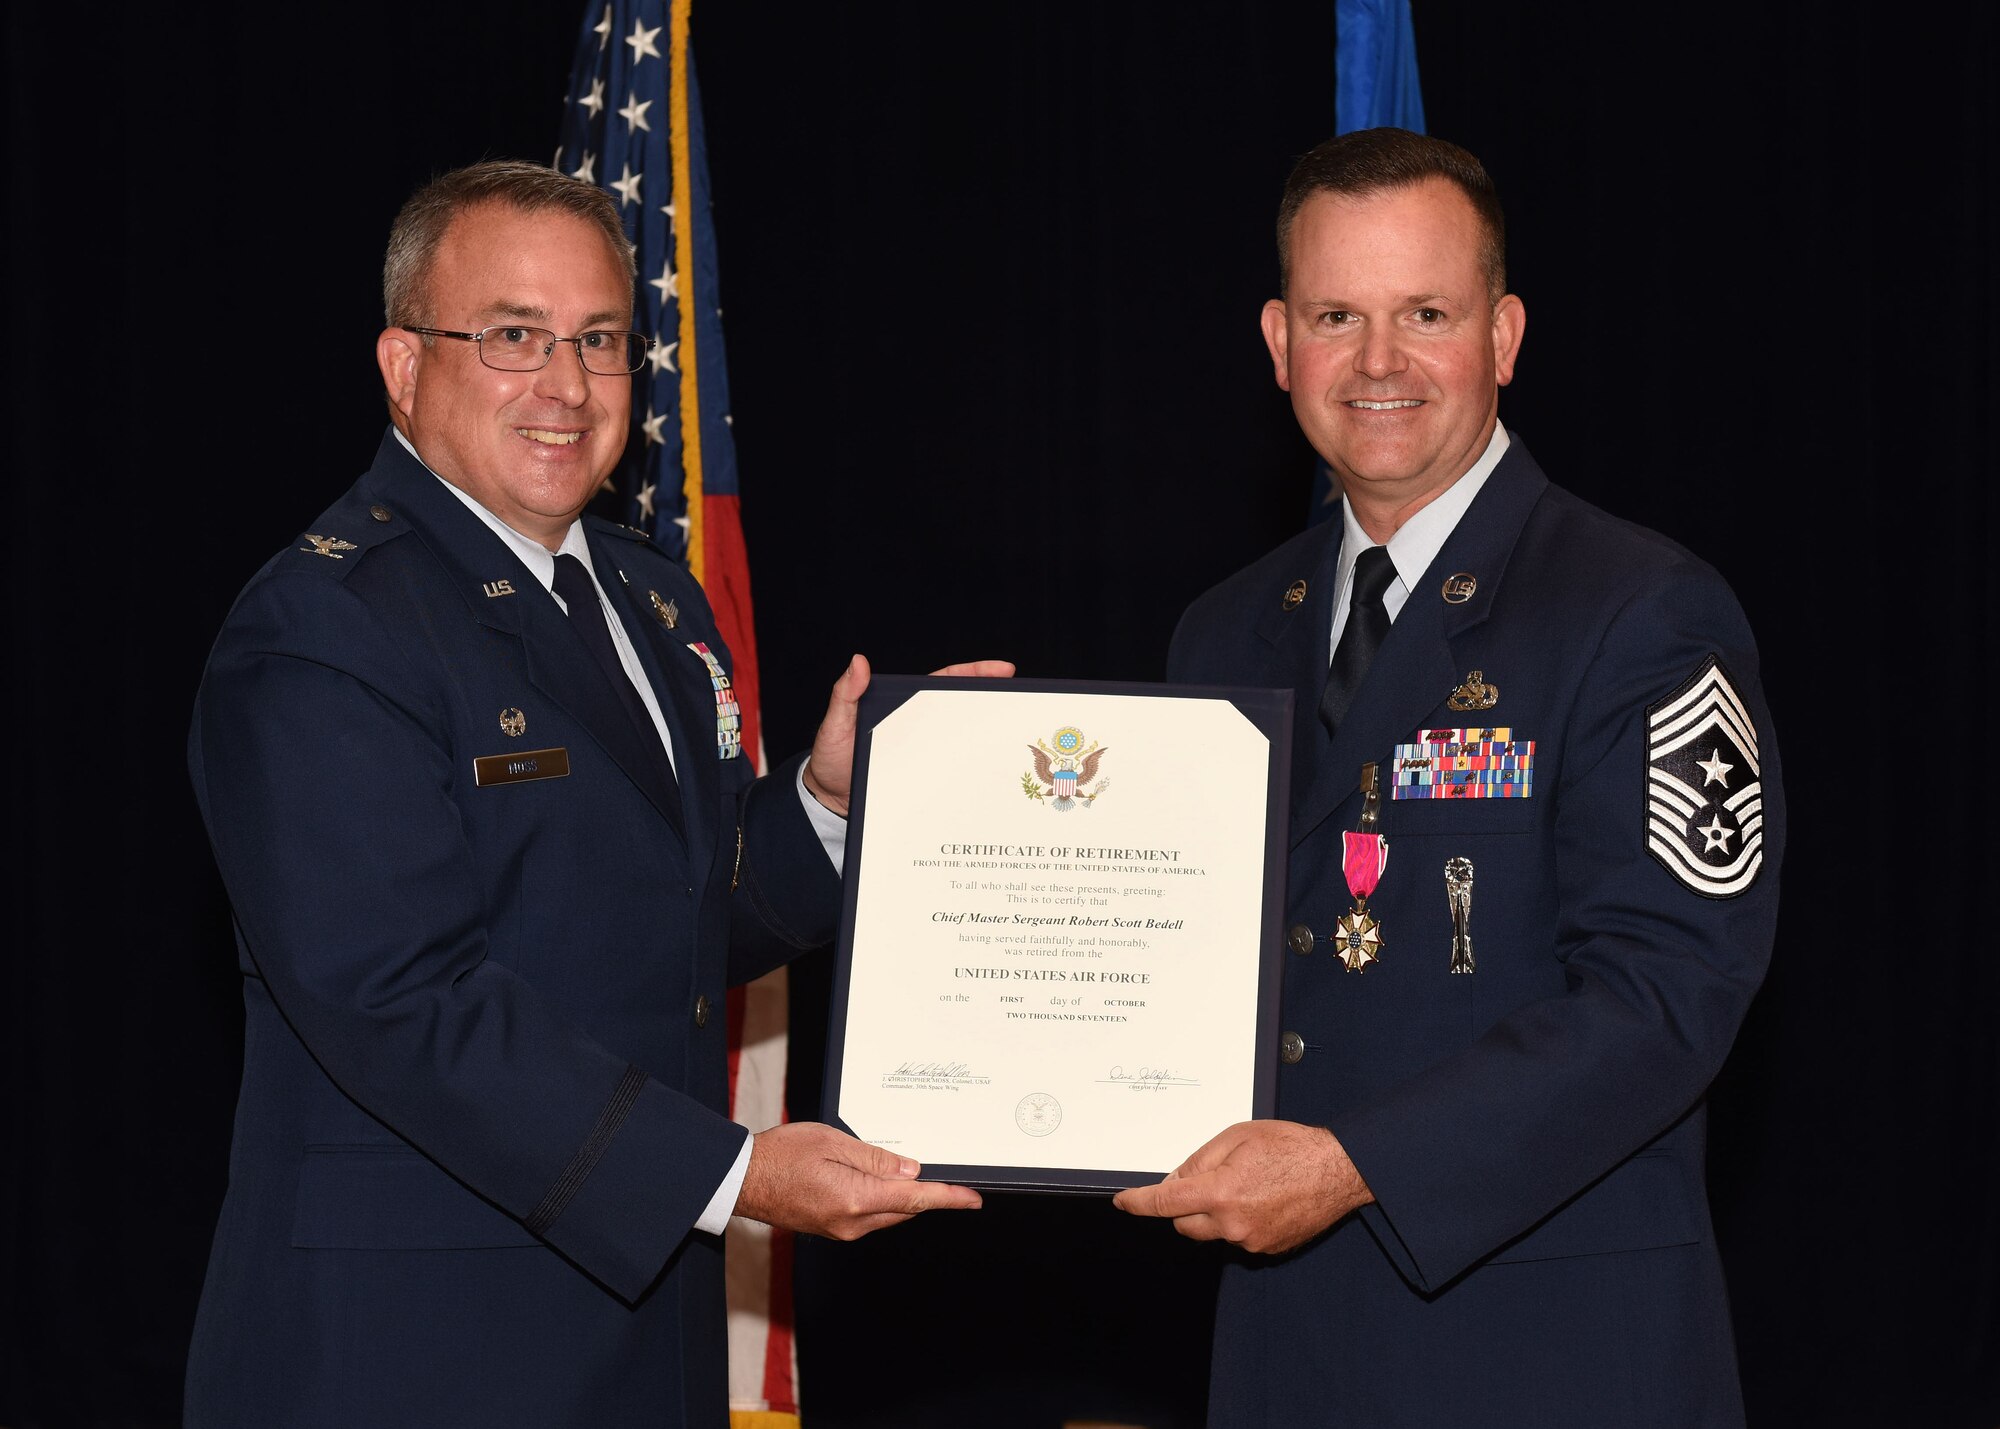 Retired Col. J. Christopher Moss, former 30th Space Wing commander, presents a certificate of retirement to Chief Master Sgt. Robert Bedell, 30th SW command chief, June 29, 2017, Vandenberg Air Force Base, Calif. Bedell, who served for 29 years, sat down before his retirement for some final words to the base to share years of experience and expertise with fellow Airmen one final time as a command chief. (U.S. Air Force photo by Senior Airman Kyla Gifford/Released)
